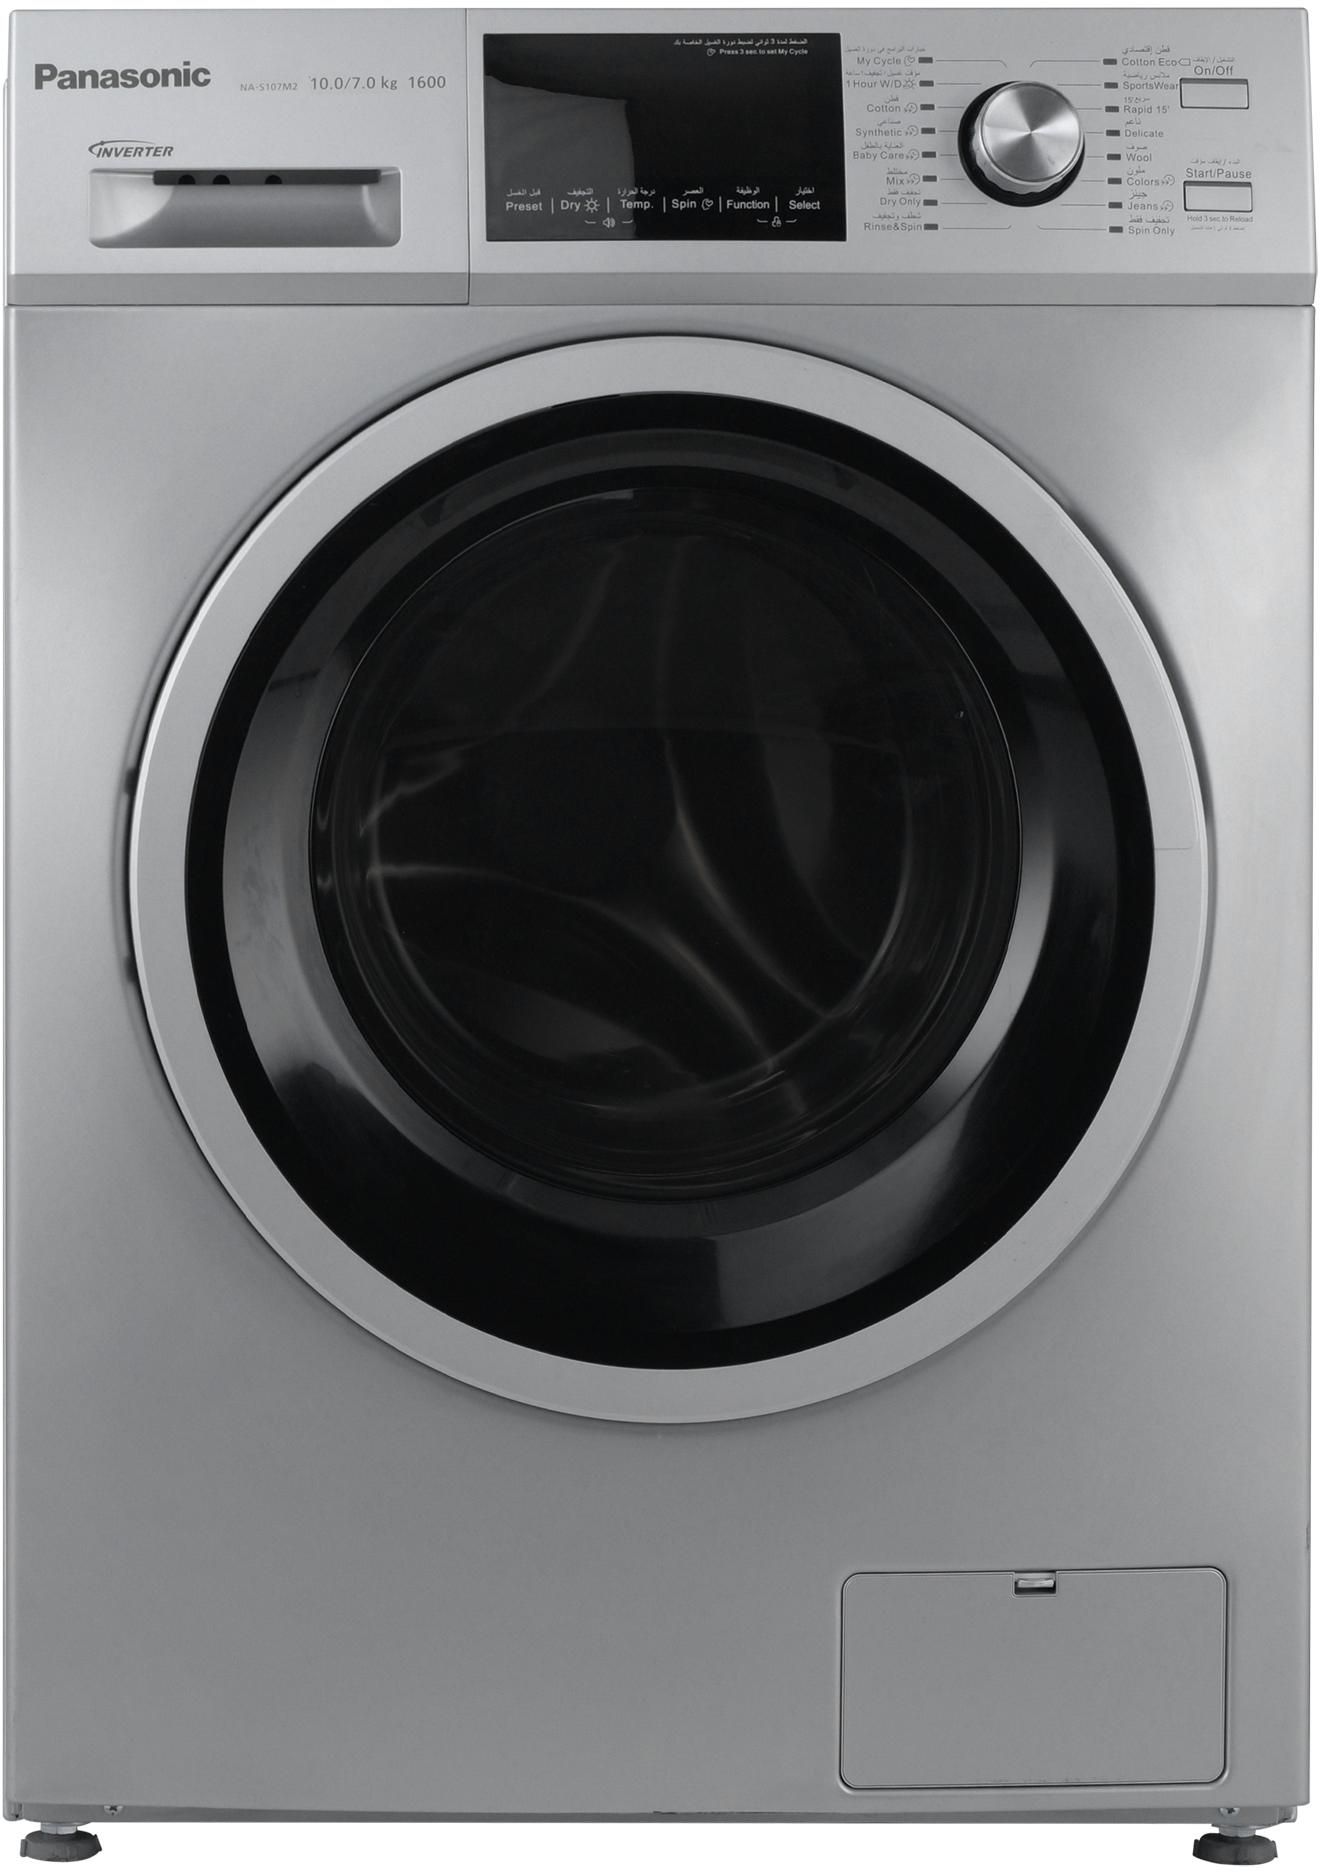 Panasonic Front Load Fully Automatic Washer Dryer 10kg / 7kg, INVERTER,Silver